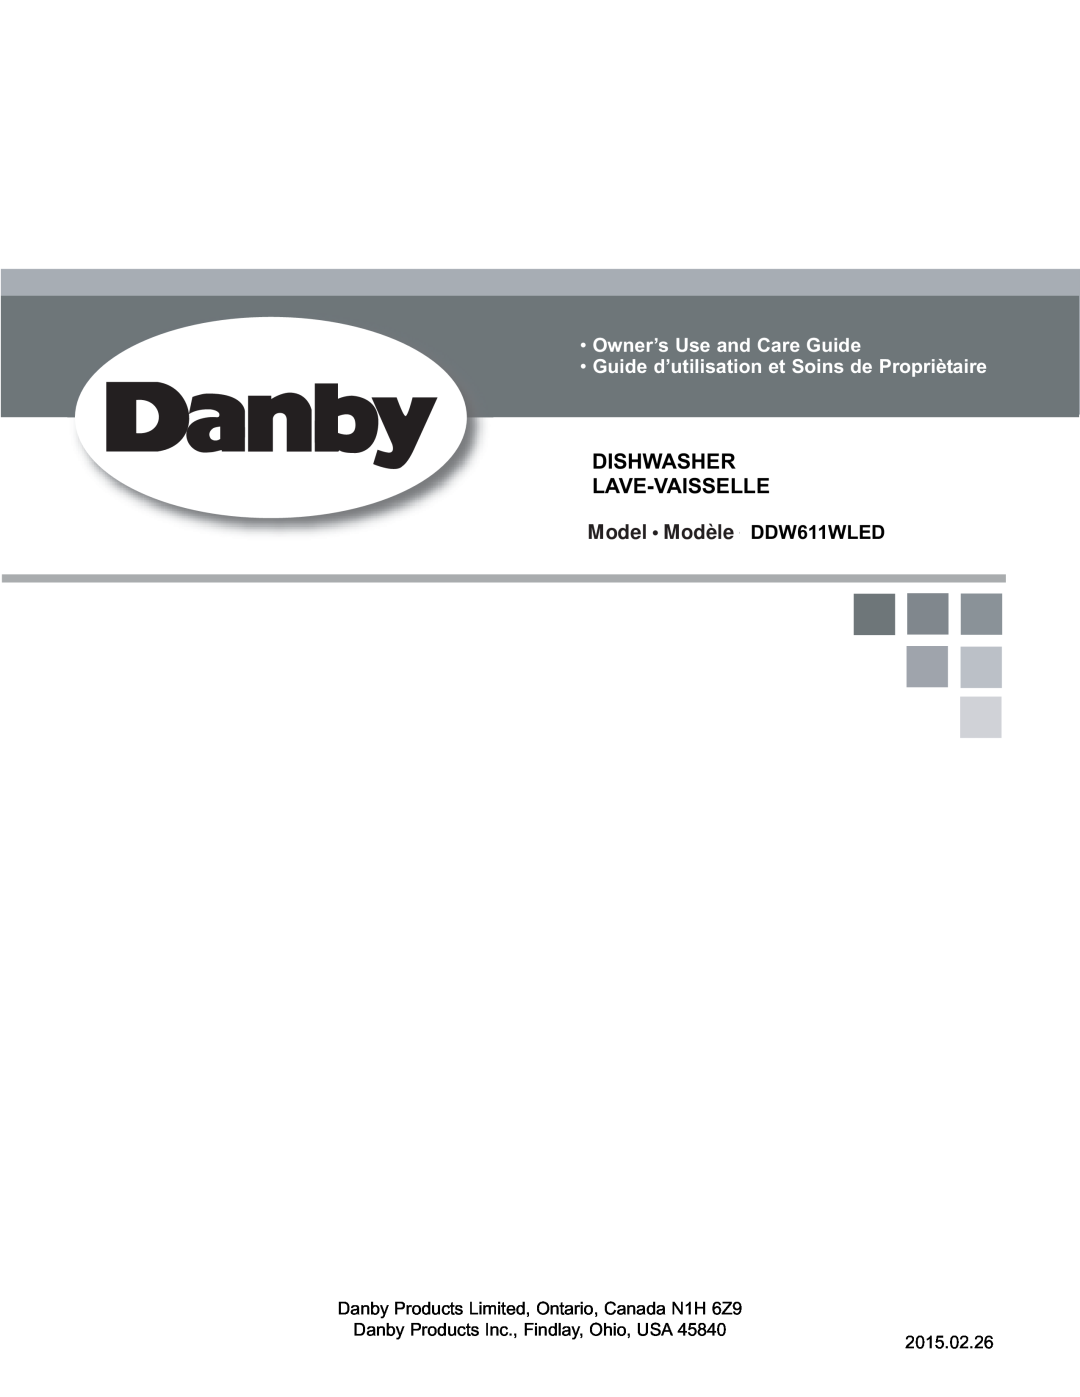 Danby manual Dishwasher Lave-Vaisselle, Model Modèle ModeloDDW611WLED, Owner’s Use and Care Guide 